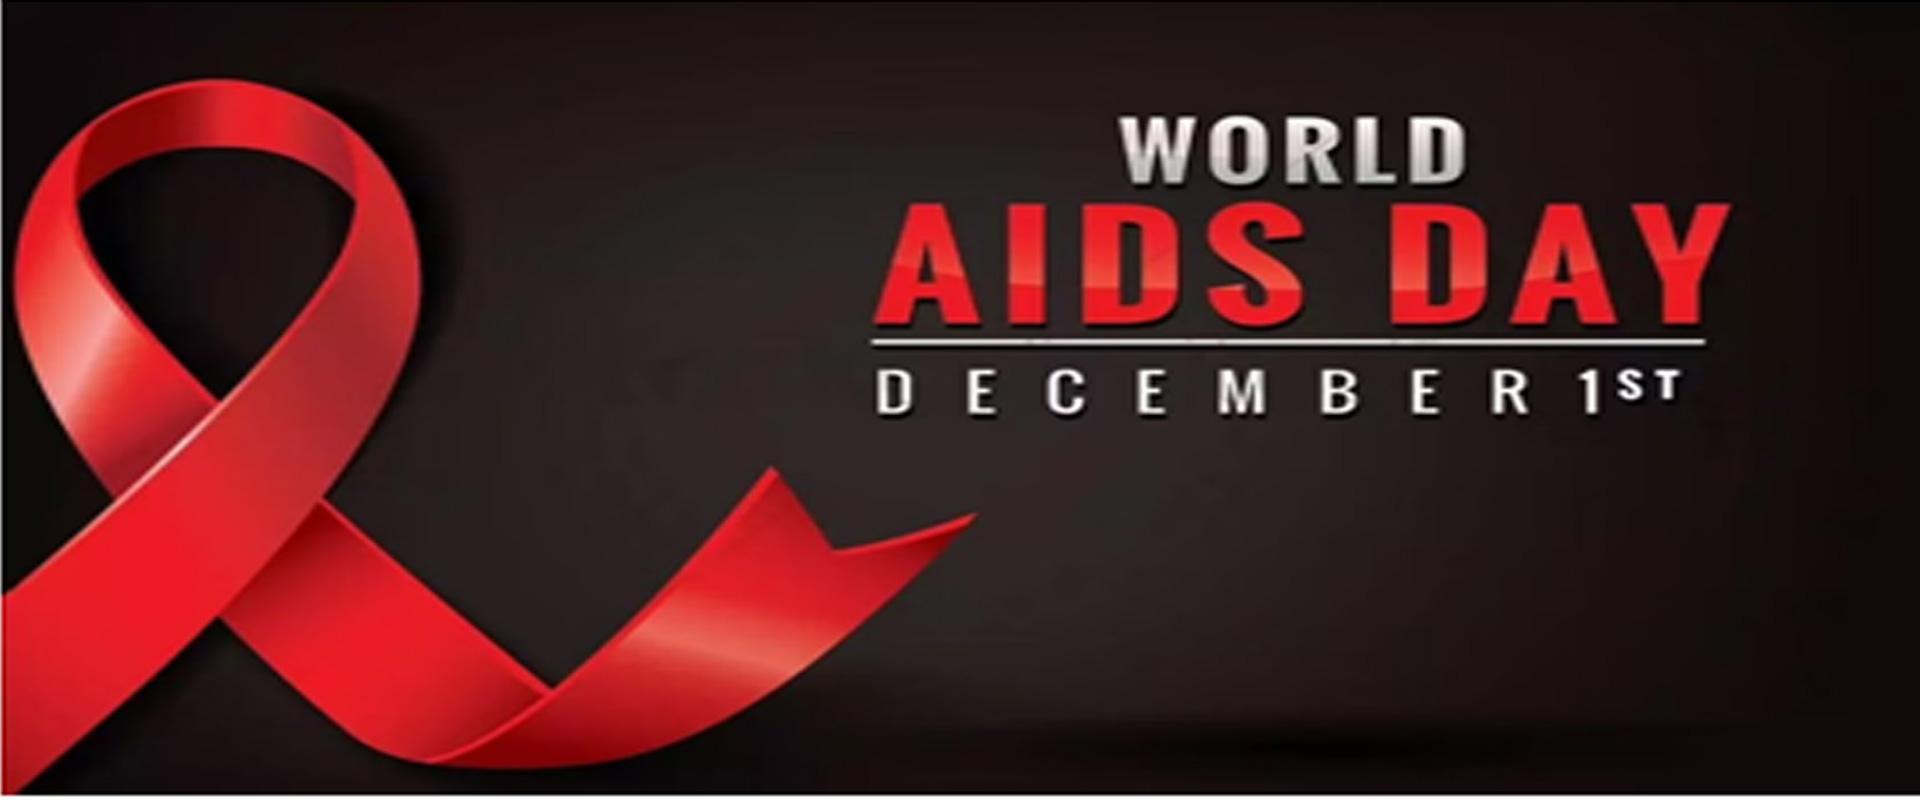 REPORT OF WORLD AIDS DAY 2021